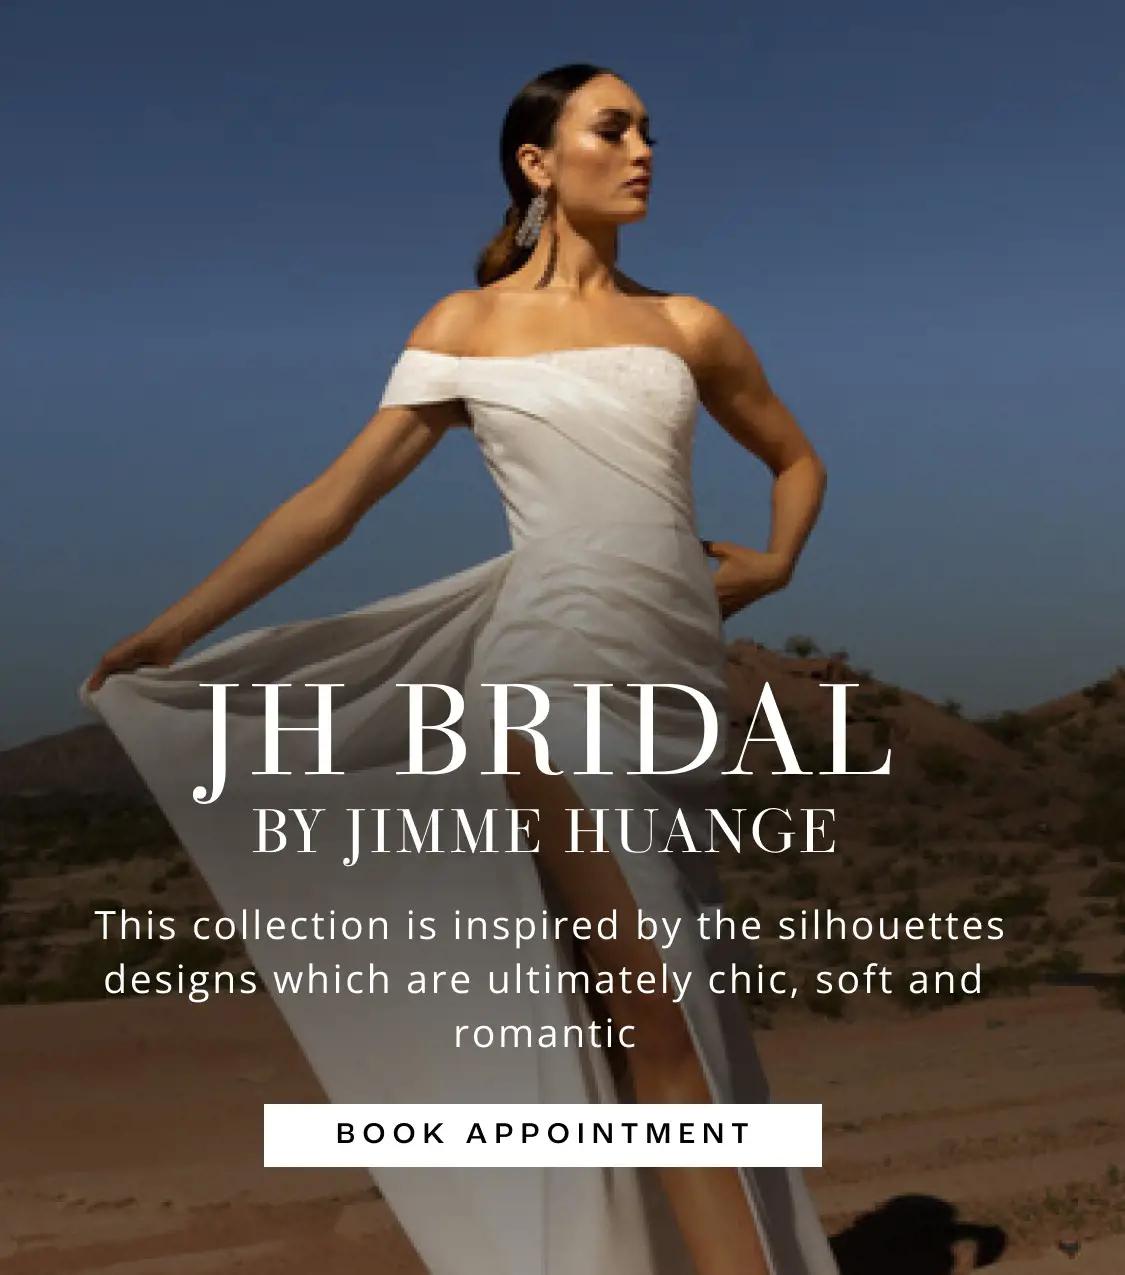 Banner Promoting JH Bridal by Jimme Huang